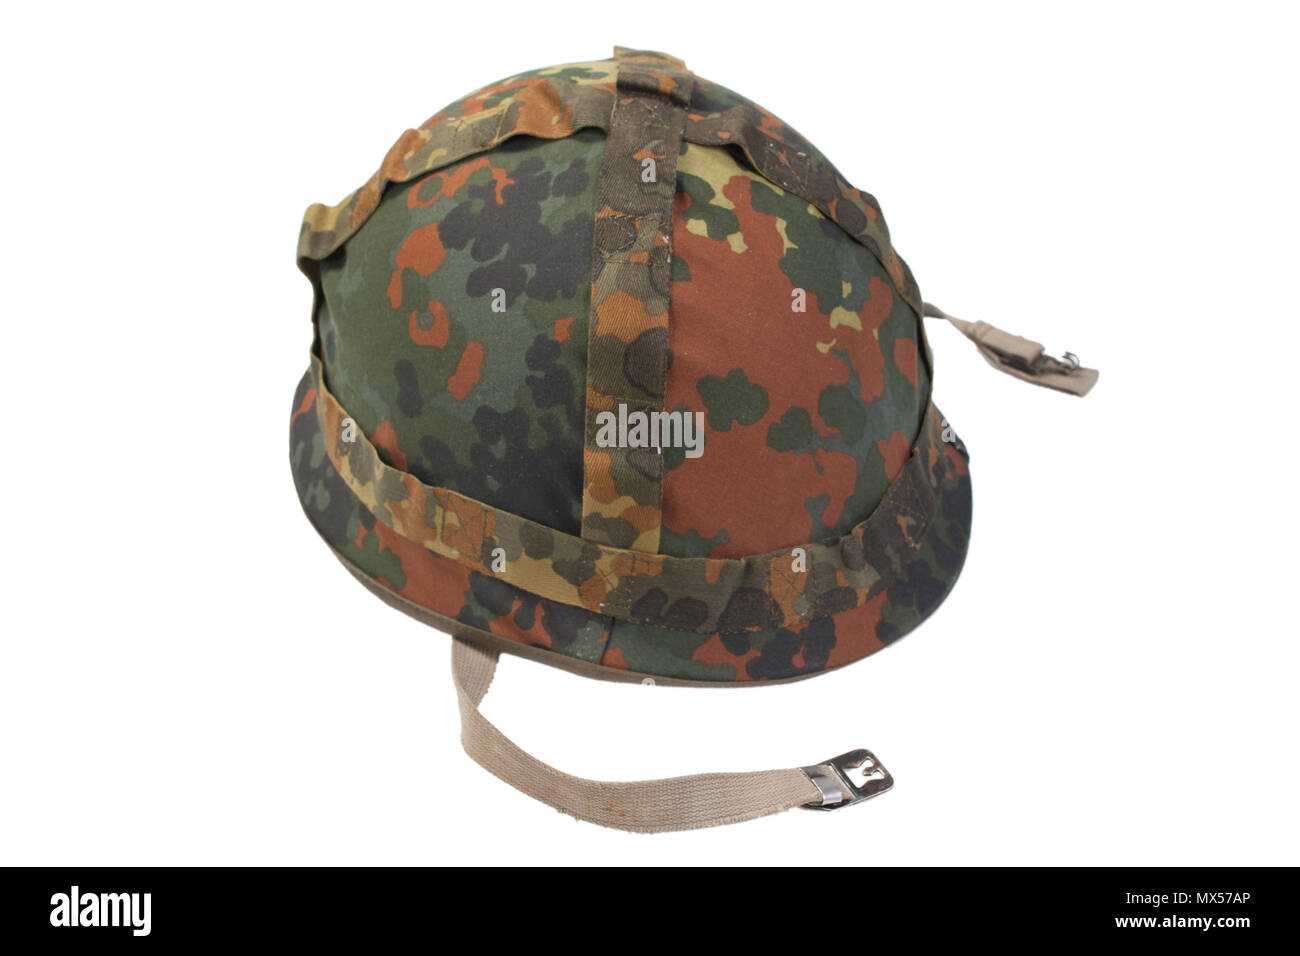 German army helmet with camouflage cover isolated on white background Stock Photo